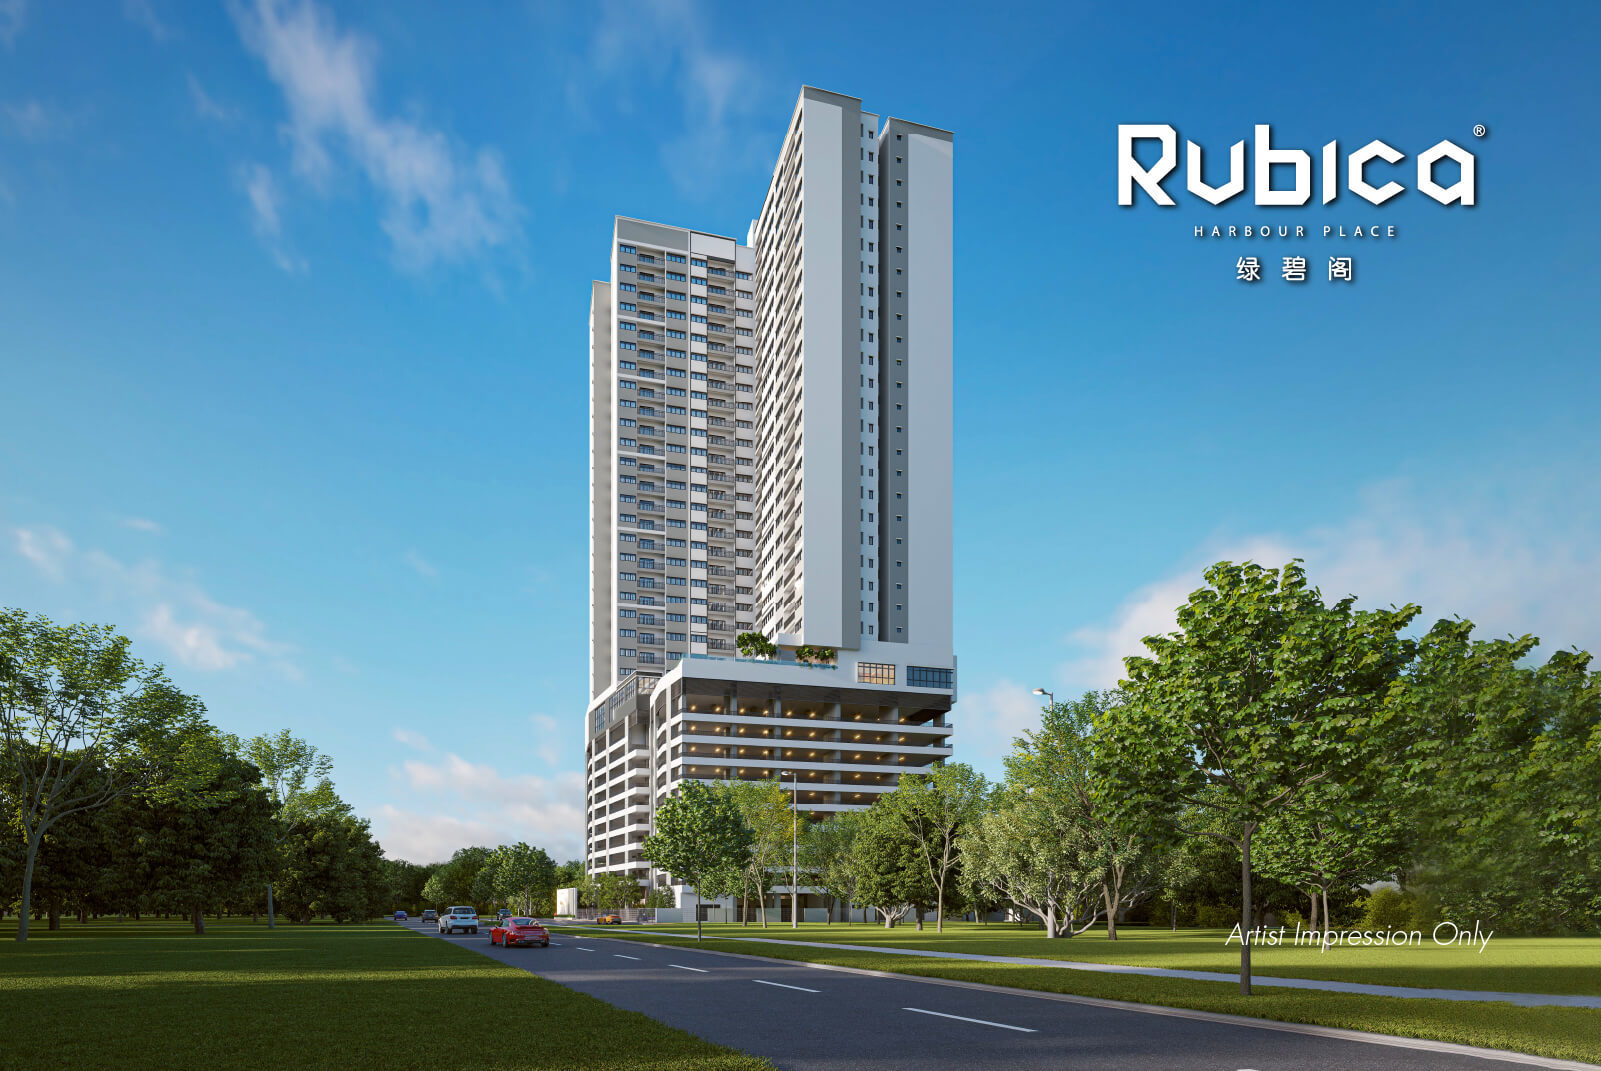 Rubica @ Harbour Place, Penang, Butterworth